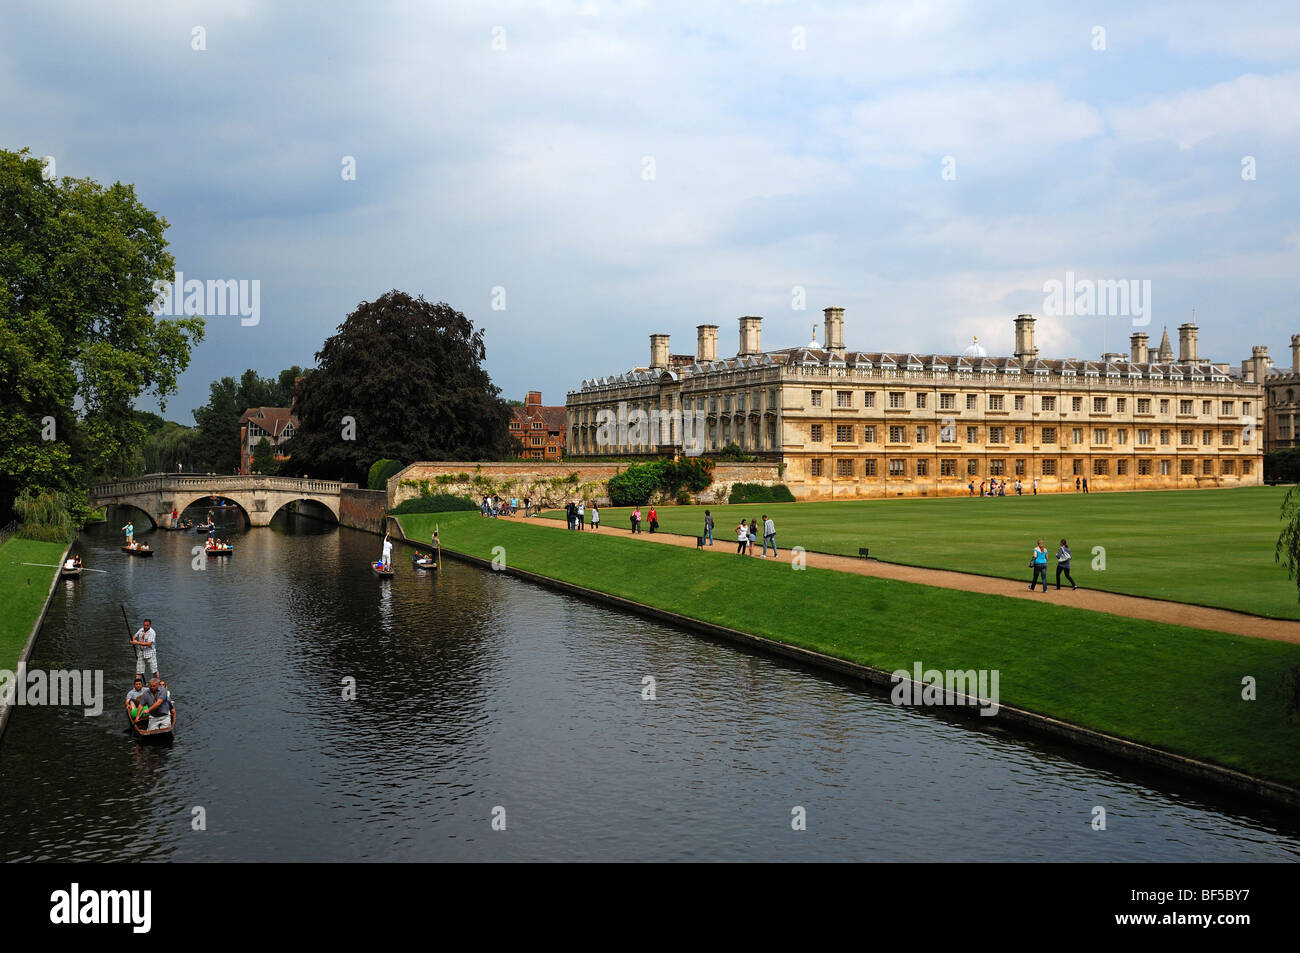 Cruise on the Cam river, called Punting, with bridge and park of King's College, King's Parade, Cambridge, Cambridgeshire, Engl Stock Photo